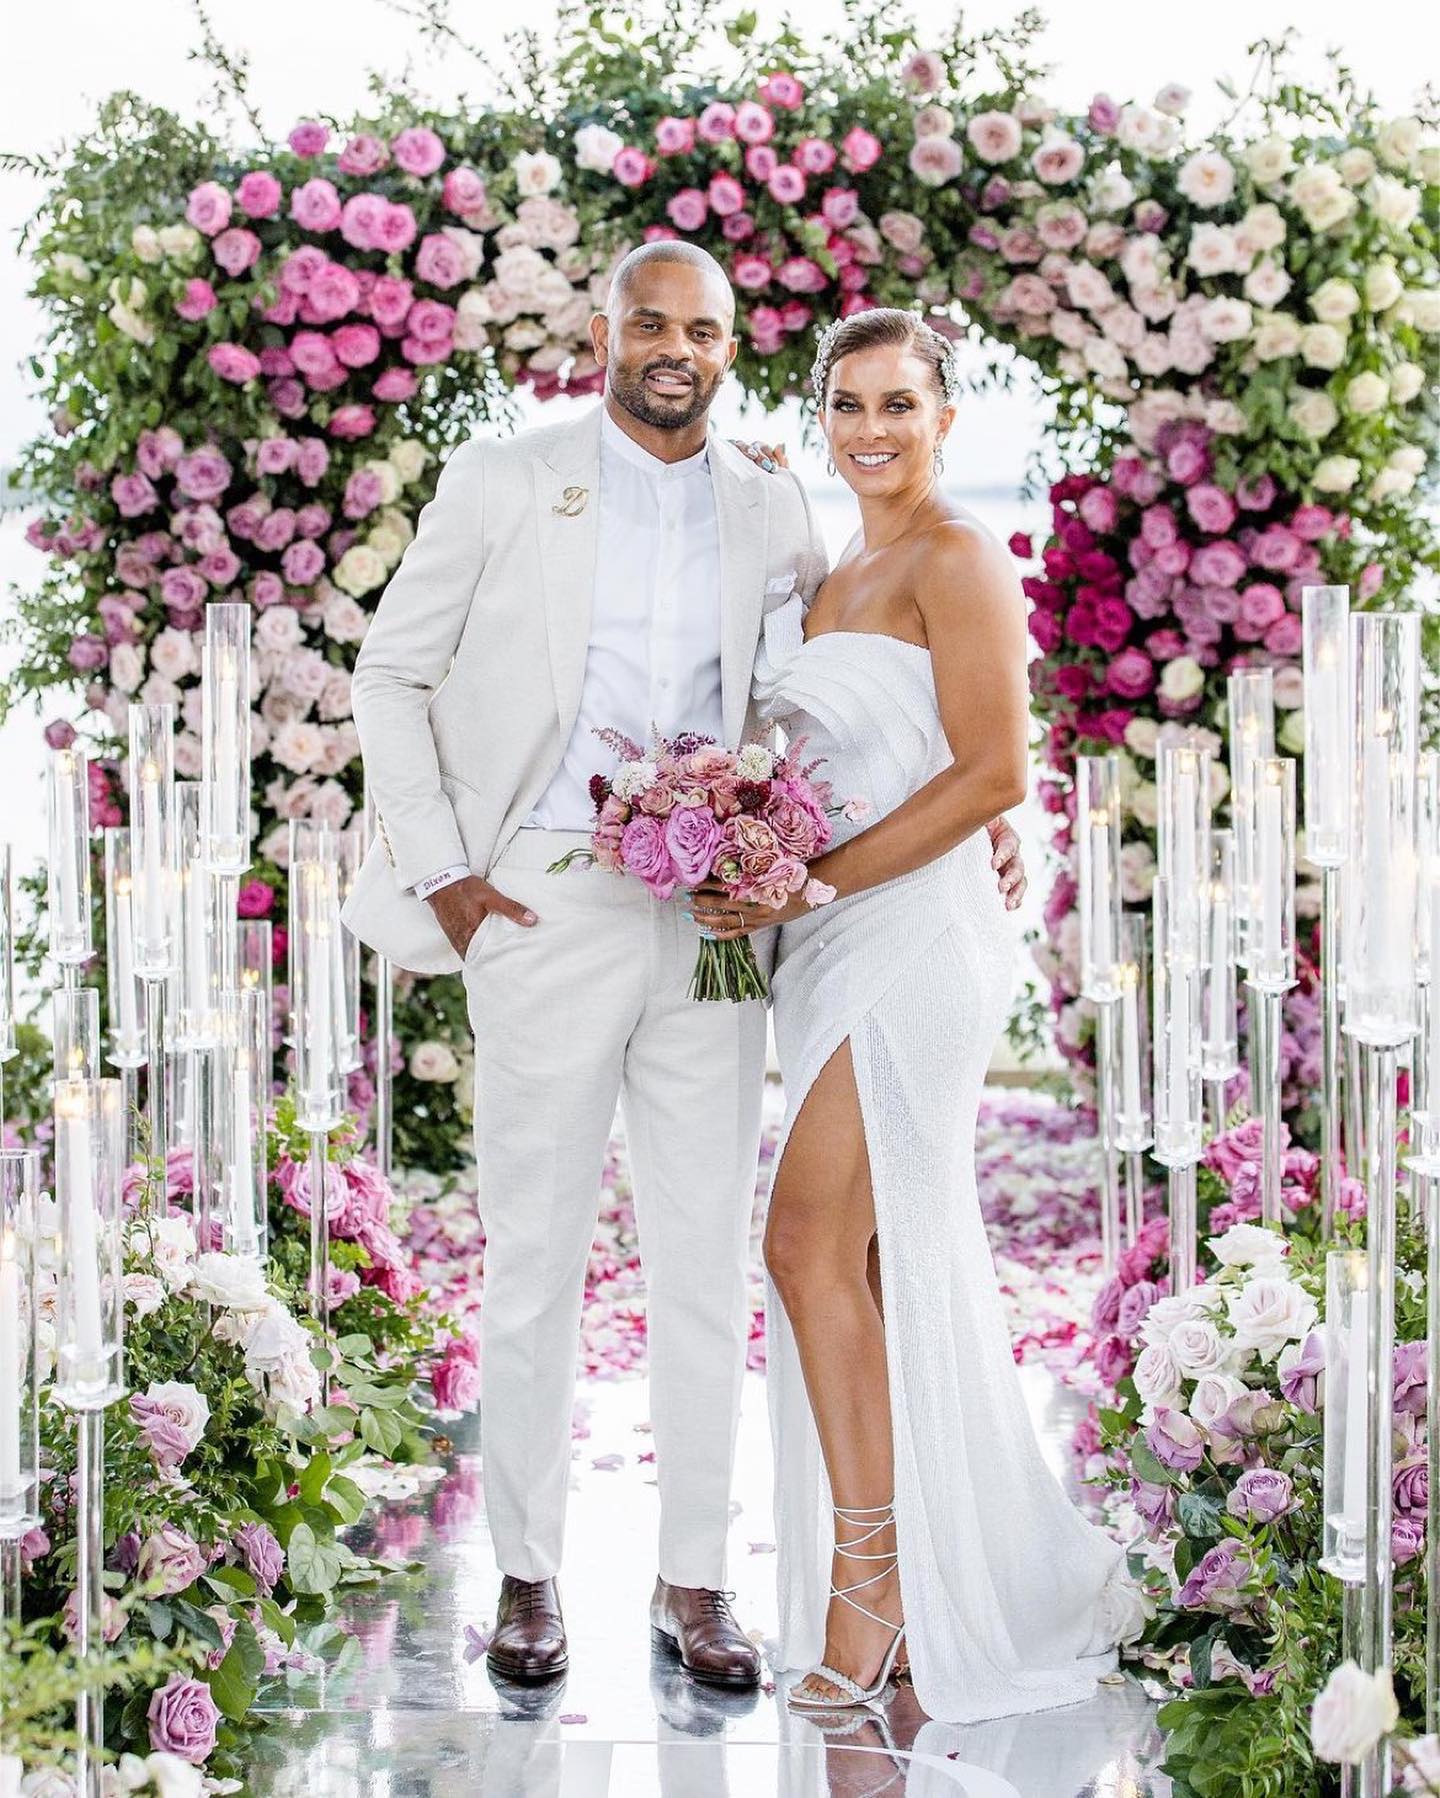 Robyn and Juan Dixon Tie The Knot…Again!